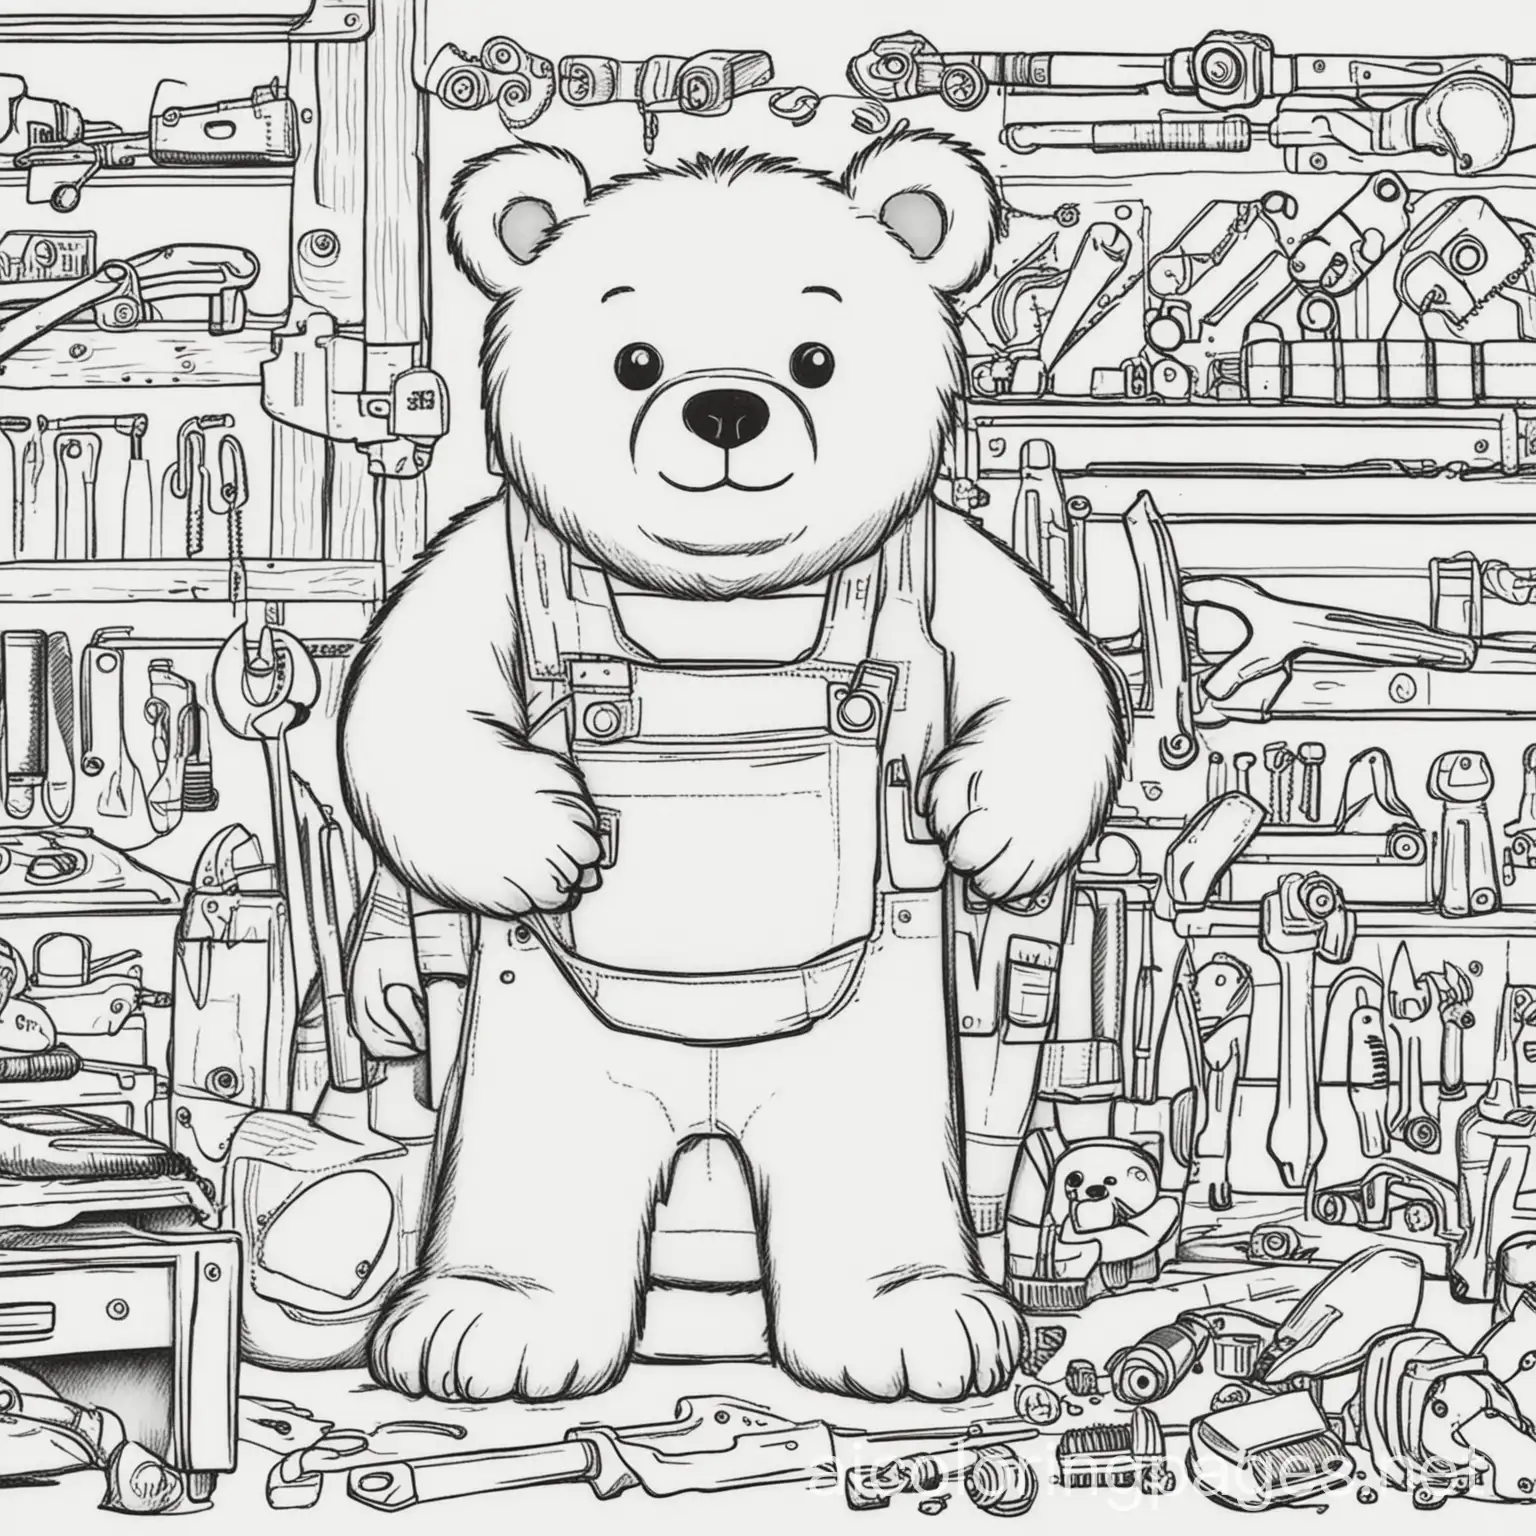 Bear-Working-at-a-Hardware-Store-with-Tools-Coloring-Page